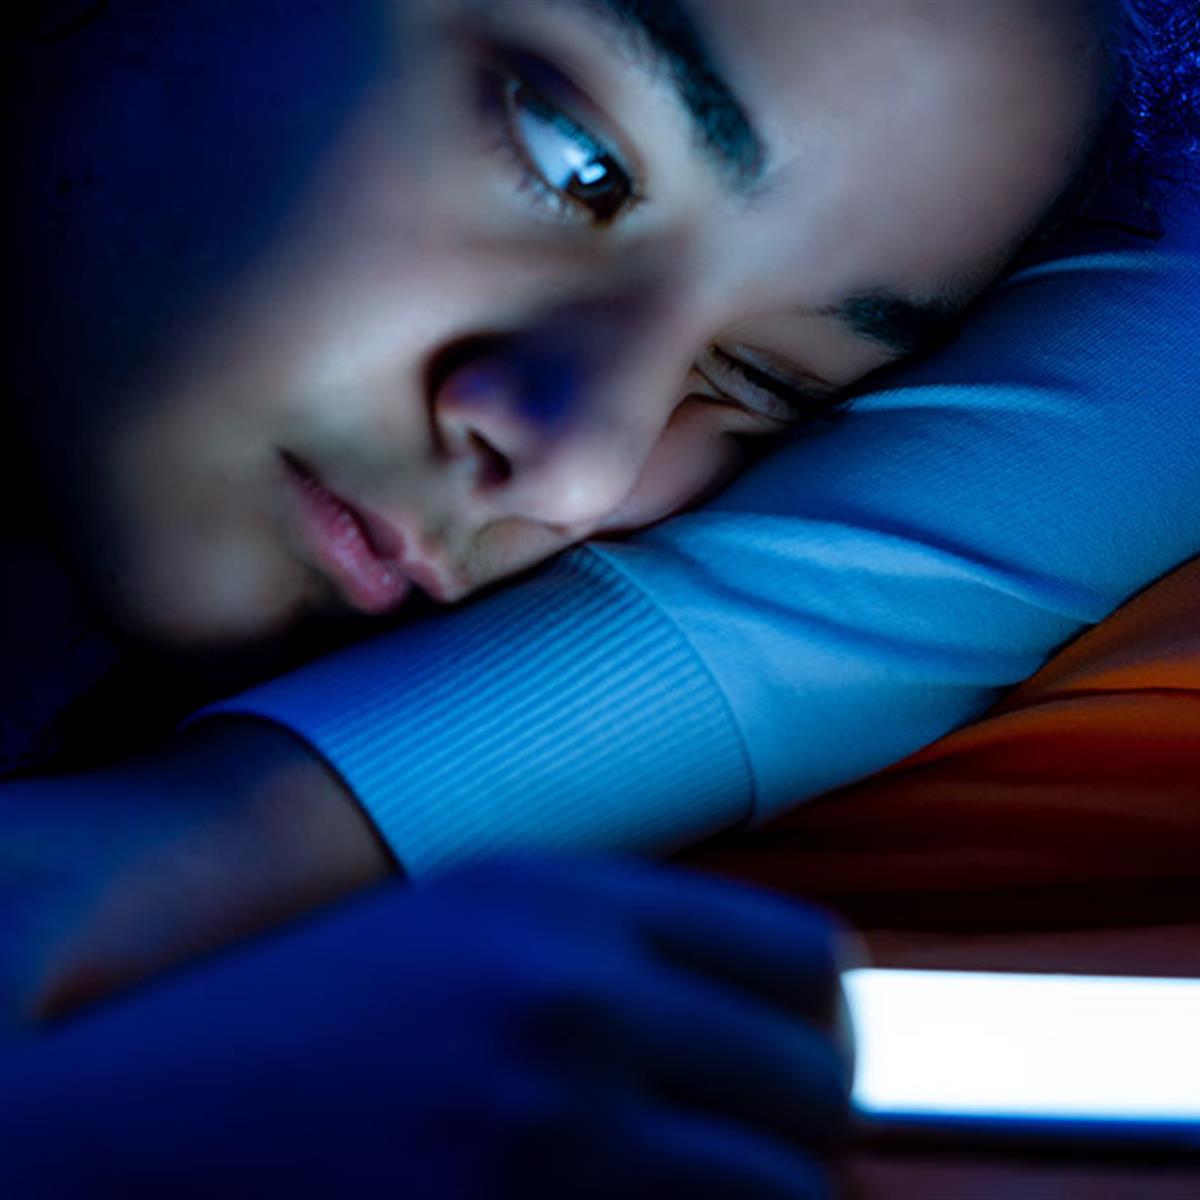 Teen Sleep Videos - My teen is having more trouble falling asleep at night lately. How can I  help? - HealthyChildren.org